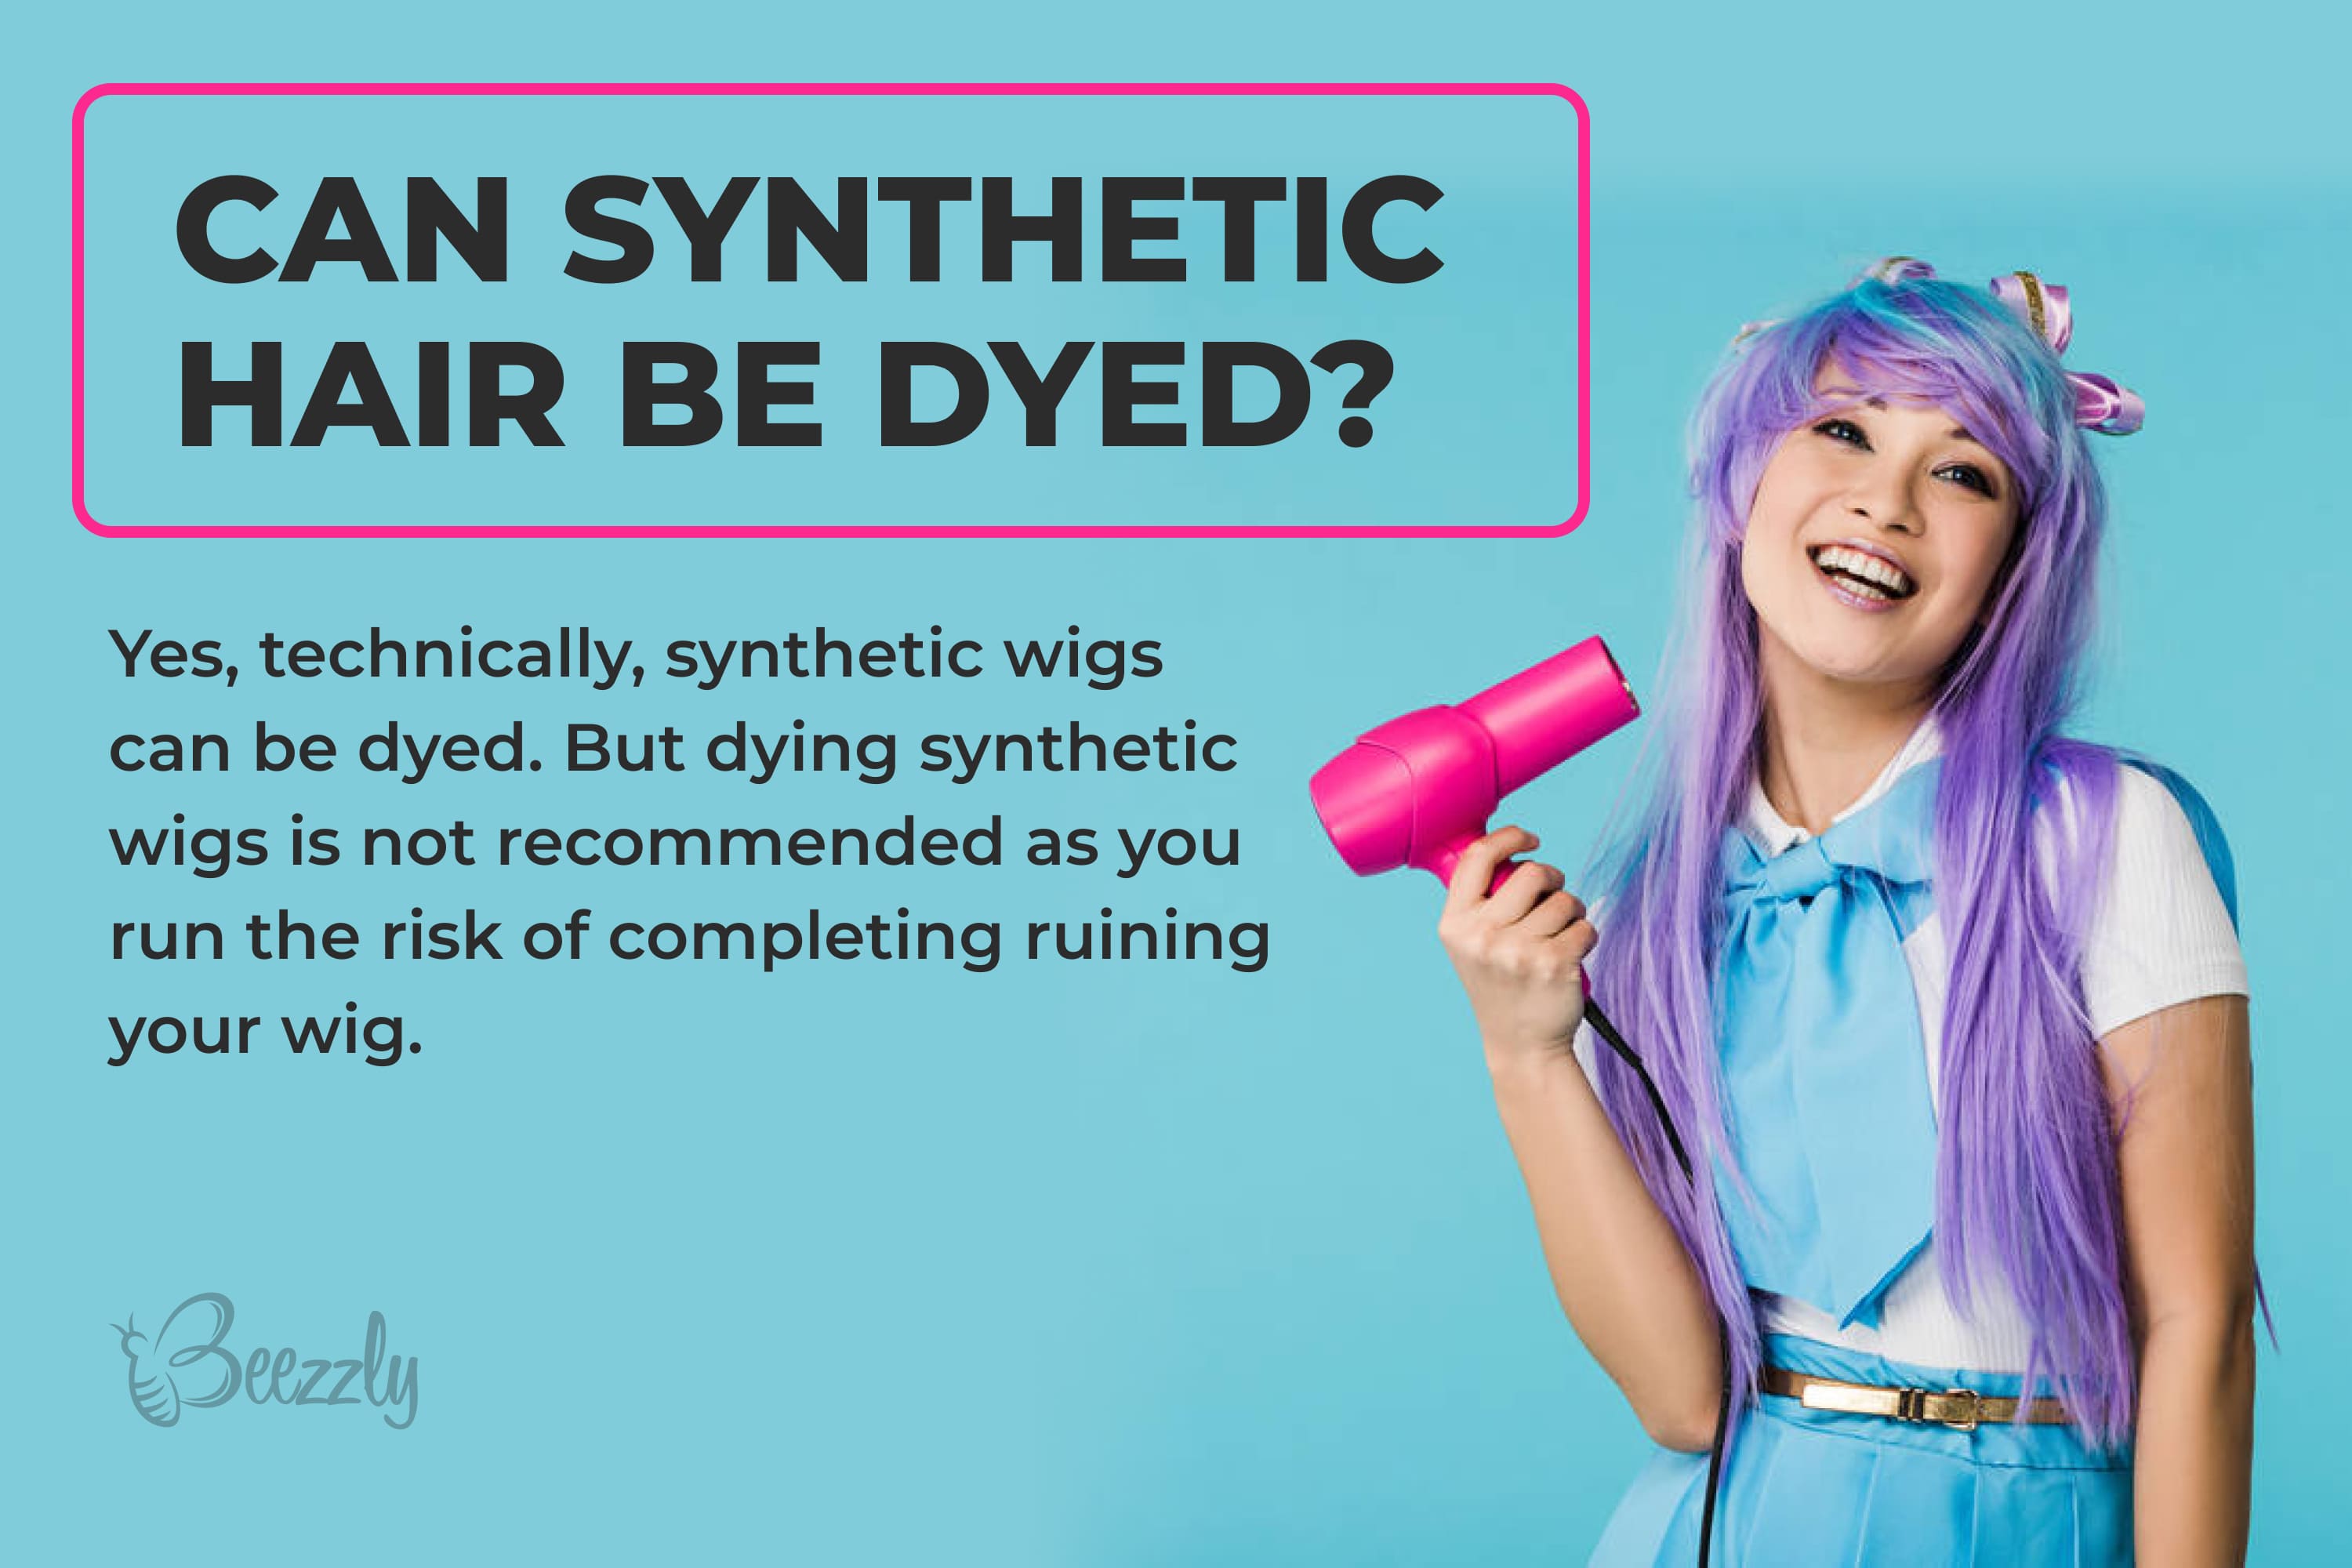 Can synthetic hair be dyed